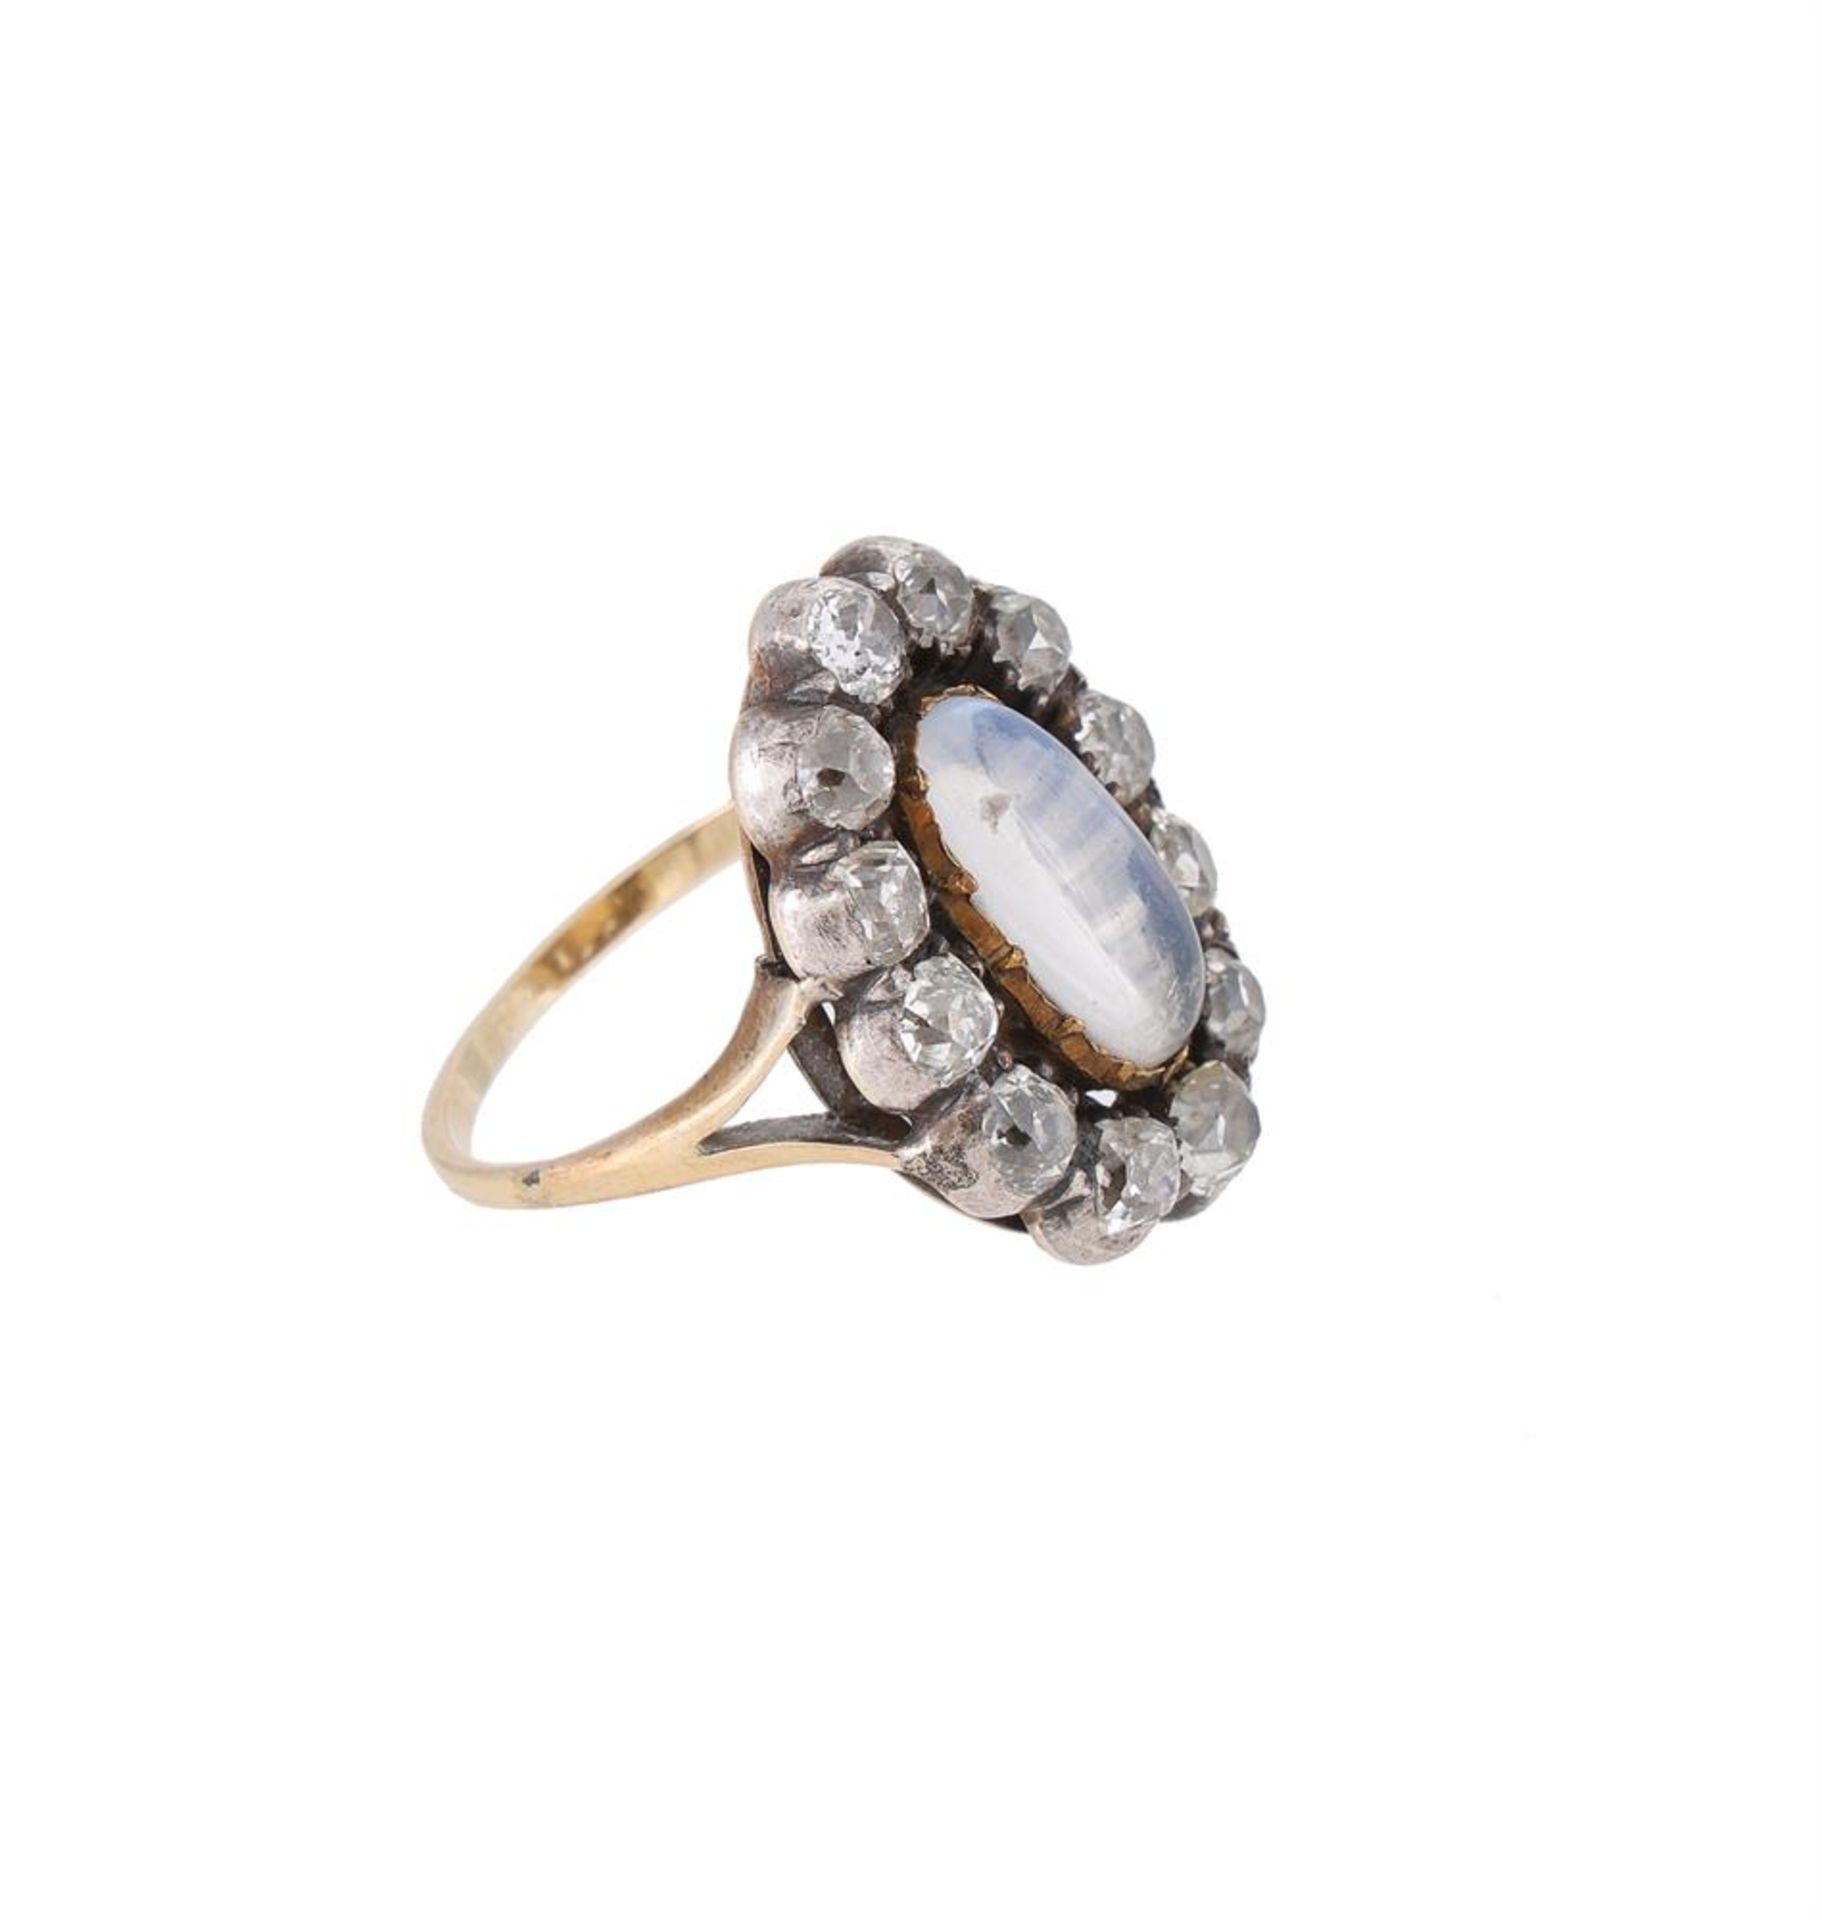 A DIAMOND AND MOONSTONE CLUSTER DRESS RING - Image 2 of 2